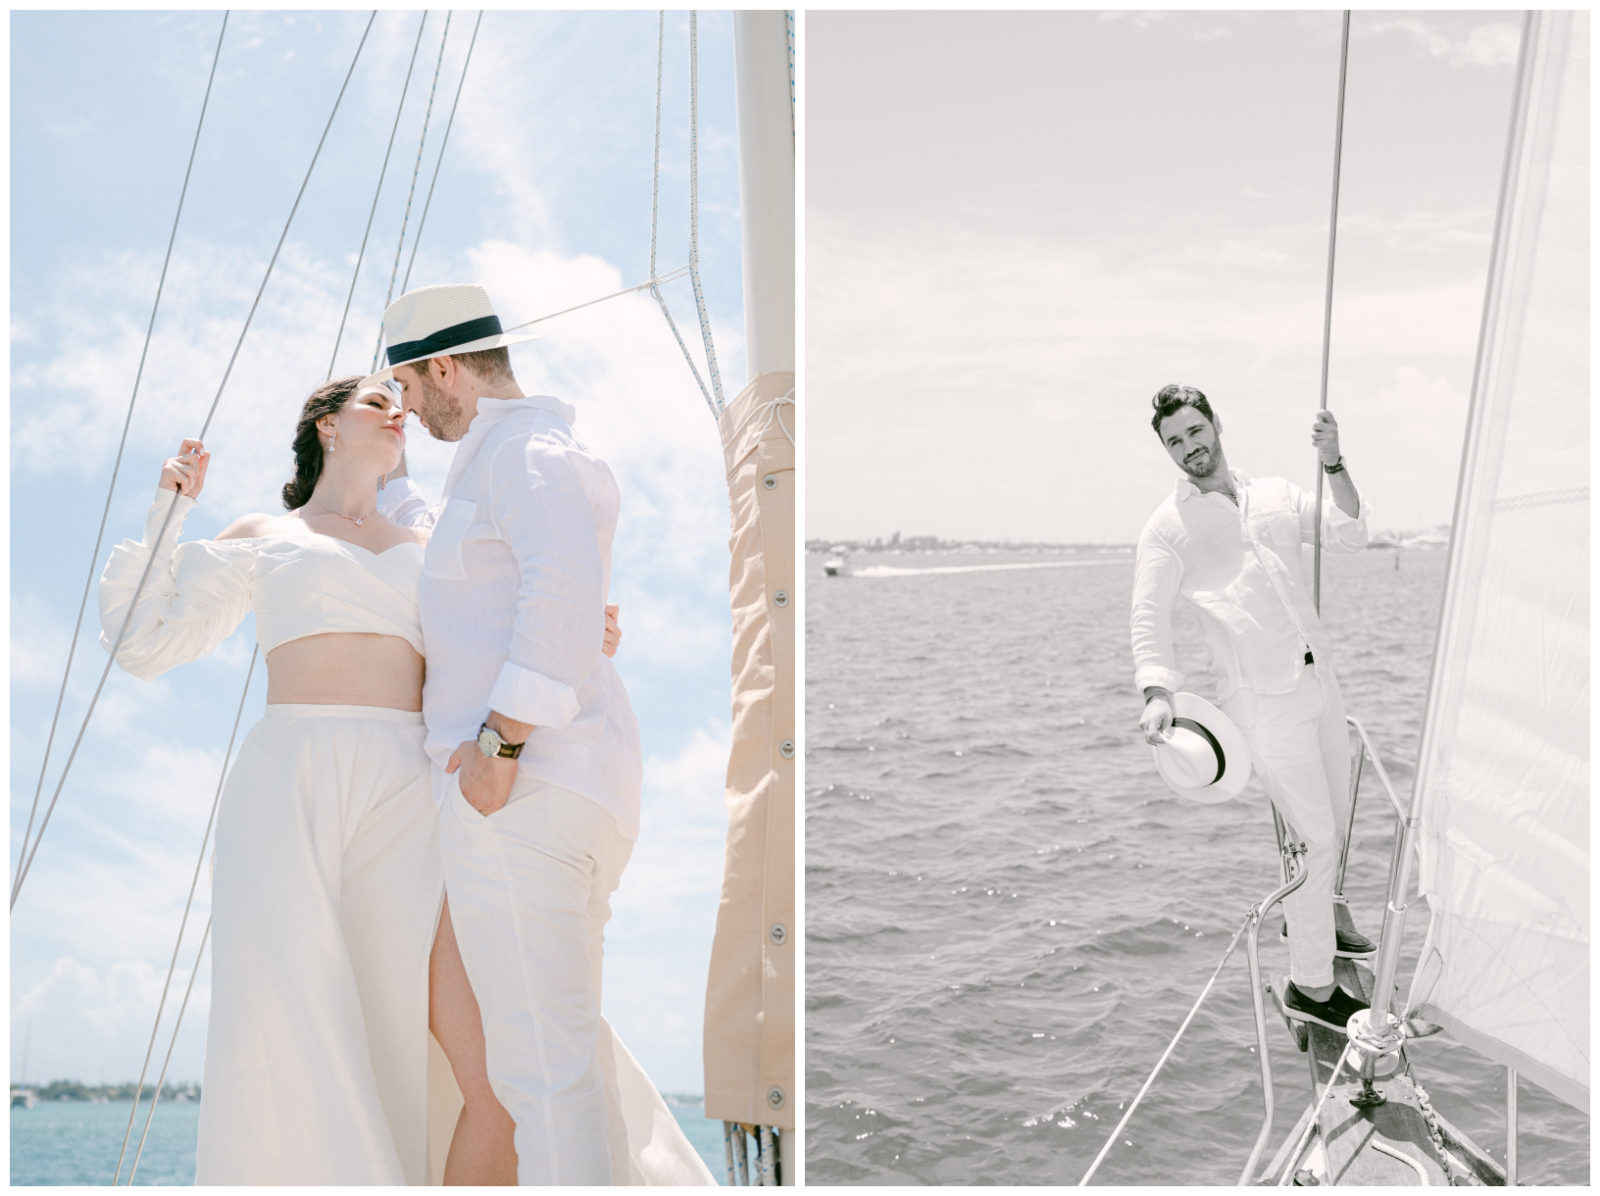 Couple getting married on a sailboat in South Florida